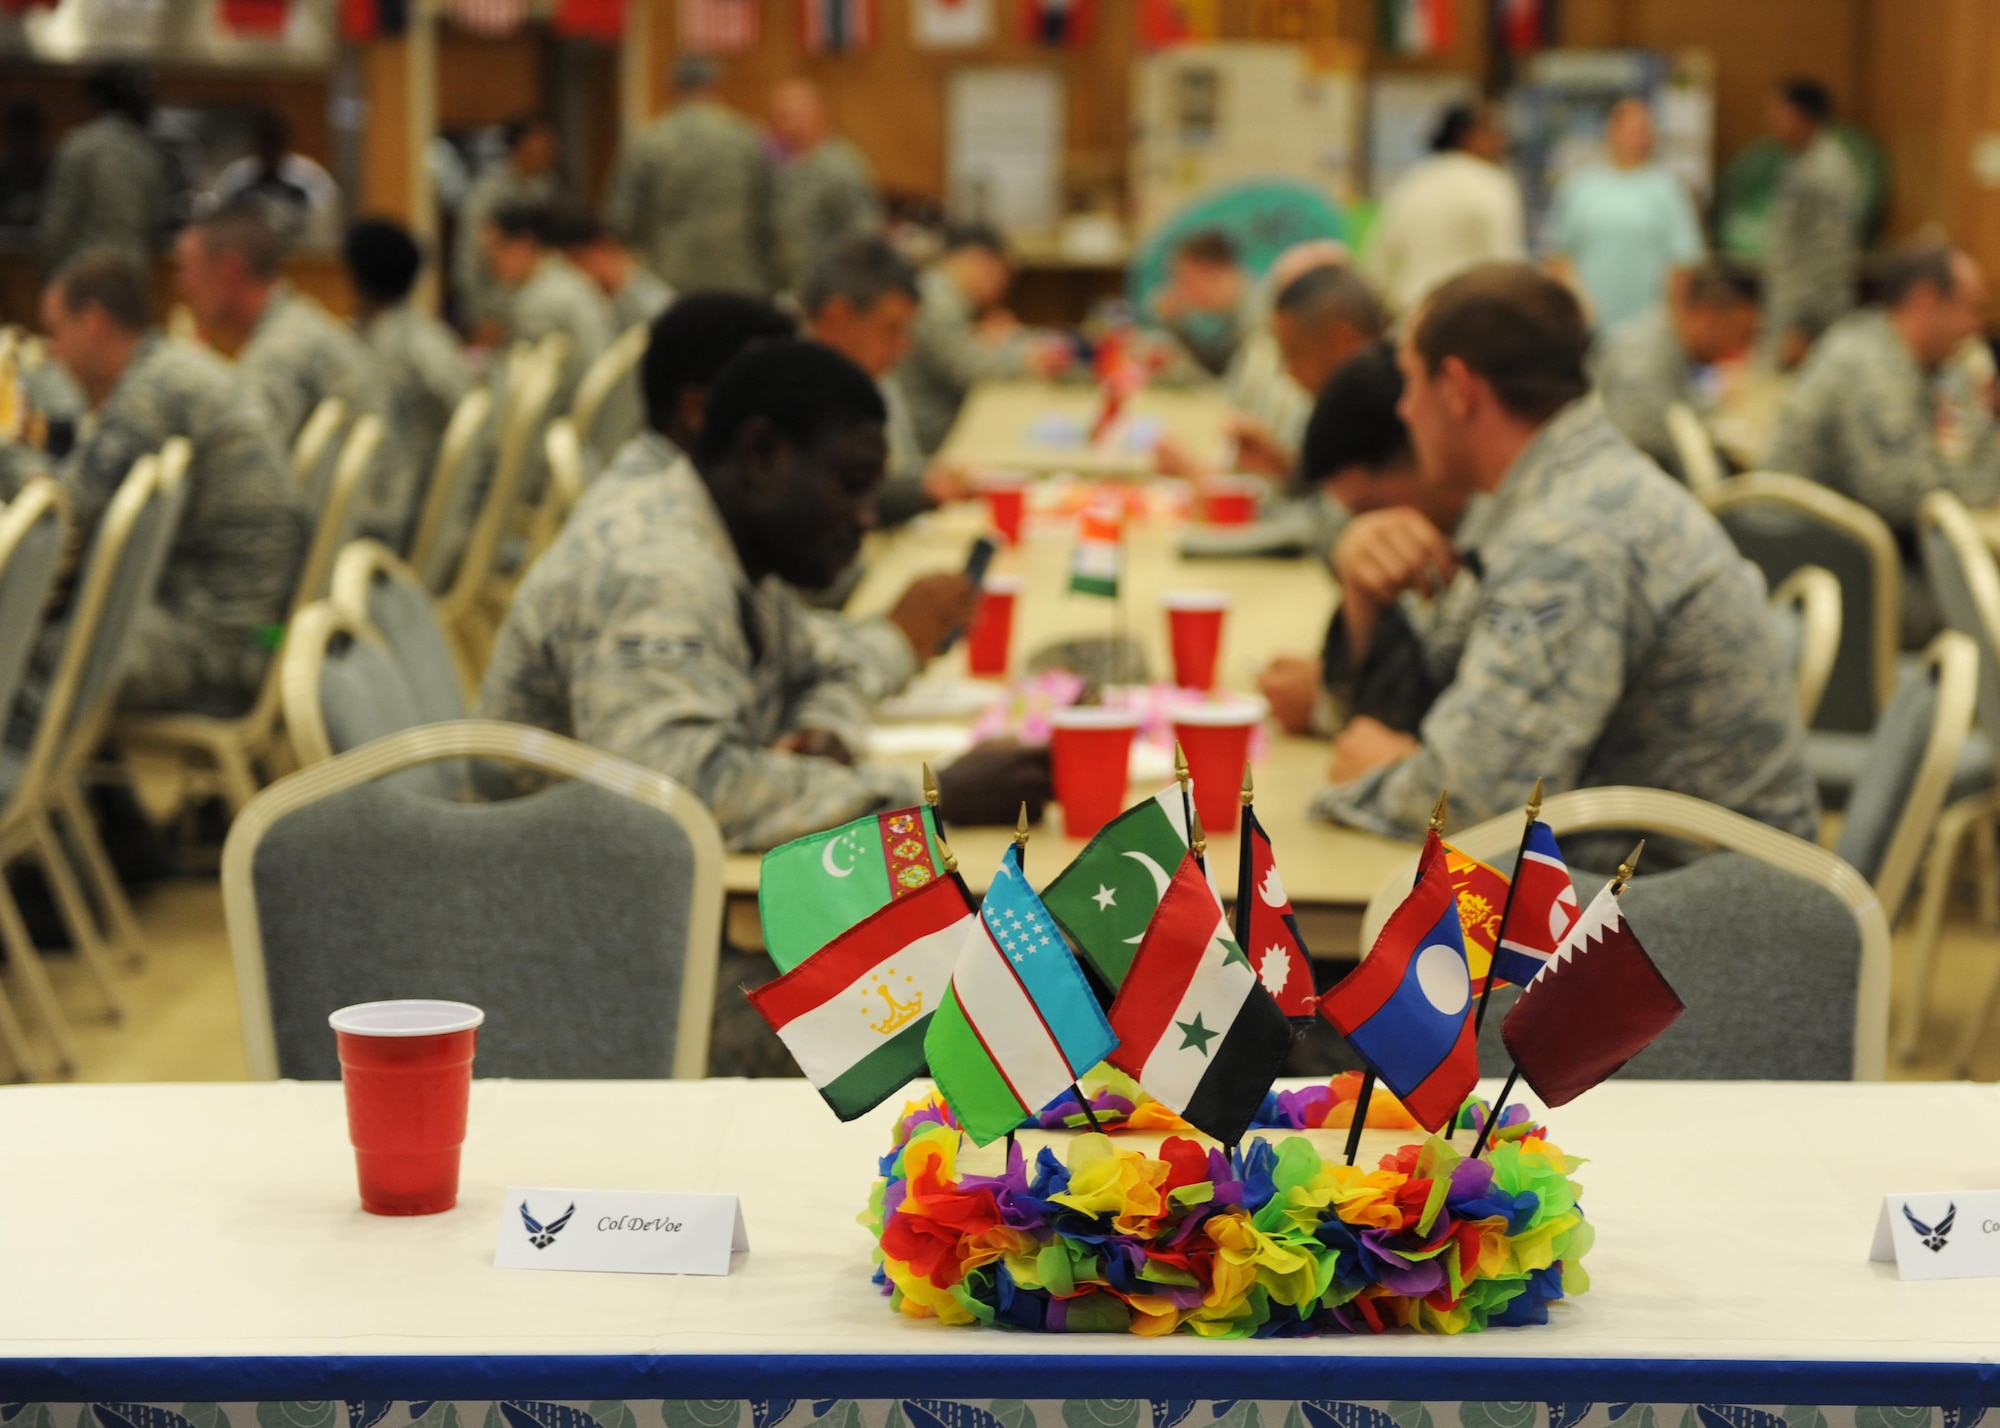 Team Little Rock members celebrate American Asian and Pacific Islander Month during a luncheon May 26, 2017, at the Walter's Community Support Center on Little Rock Air Force Base, Ark. The event educated and highlighted Asian American and Pacific Islander heritage. (U.S. Air Force photo by Airman 1st Class Grace Nichols)